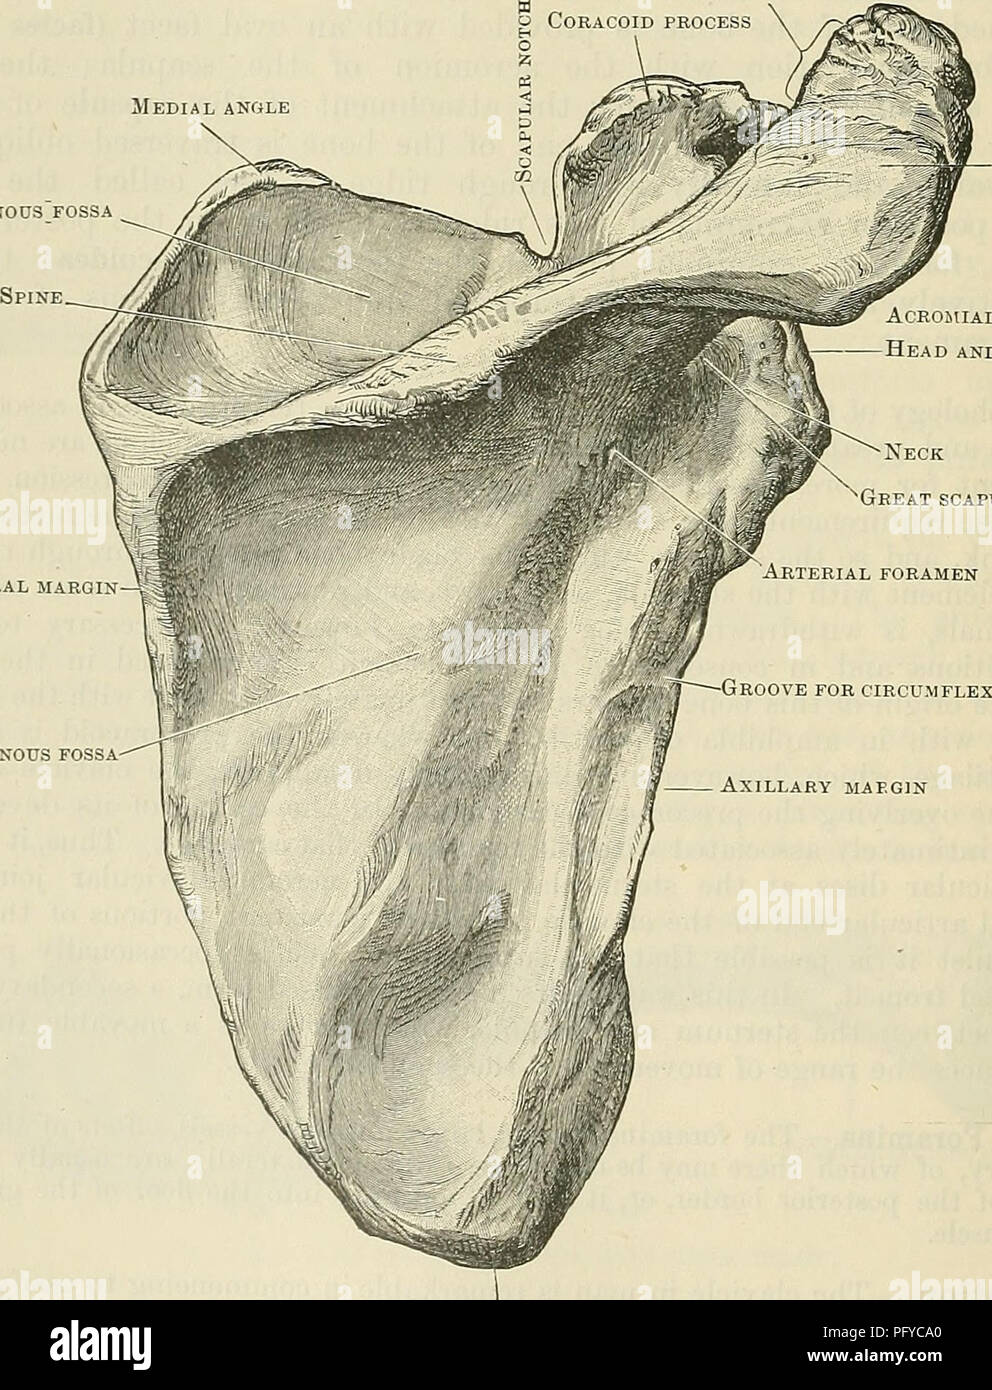 . Cunningham's Text-book of anatomy. Anatomy. Fig. 188.—Ossification of the Clavicle. The Scapula. The scapula, or shoulder blade, is of triangular shape and flattened form. It has two surfaces, costal or ventral, and dorsal. From the latter there springs a triangular process called the spine, which ends laterally in the acromion; Clavicular articular surface Medial angle SUPRA-SPIMOUS &quot;FOSSA Vertebral margin—I Arterial foramen. Acromial angle Head and glenoid cavity nGreat scapular notch Infra-spinous fossa Groove for circumflex scapular artery Axillary map.gin Inferior angle Fig. 189.—T Stock Photo